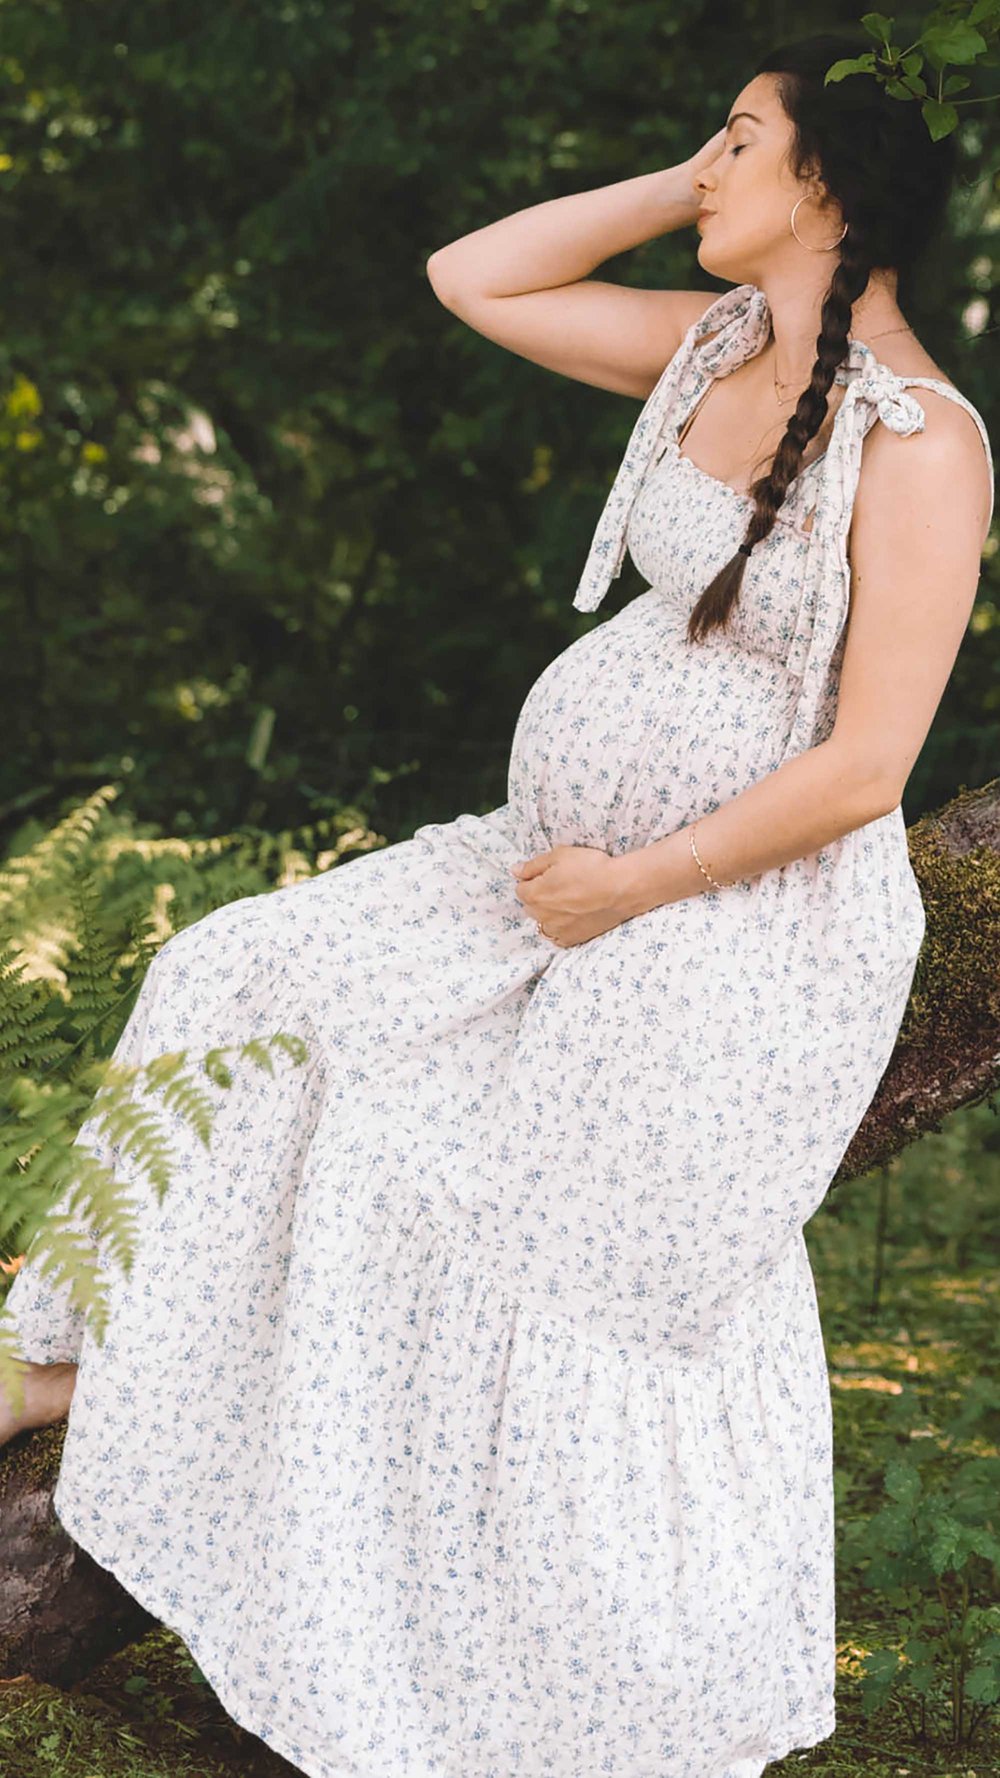 Casual Floral Maternity Dress Outfit. @sarahchristine wearing Nothing Fits Women’s Classic Nursing Momoka Dress with smocked chest in Seattle, Washington - 5.jpg